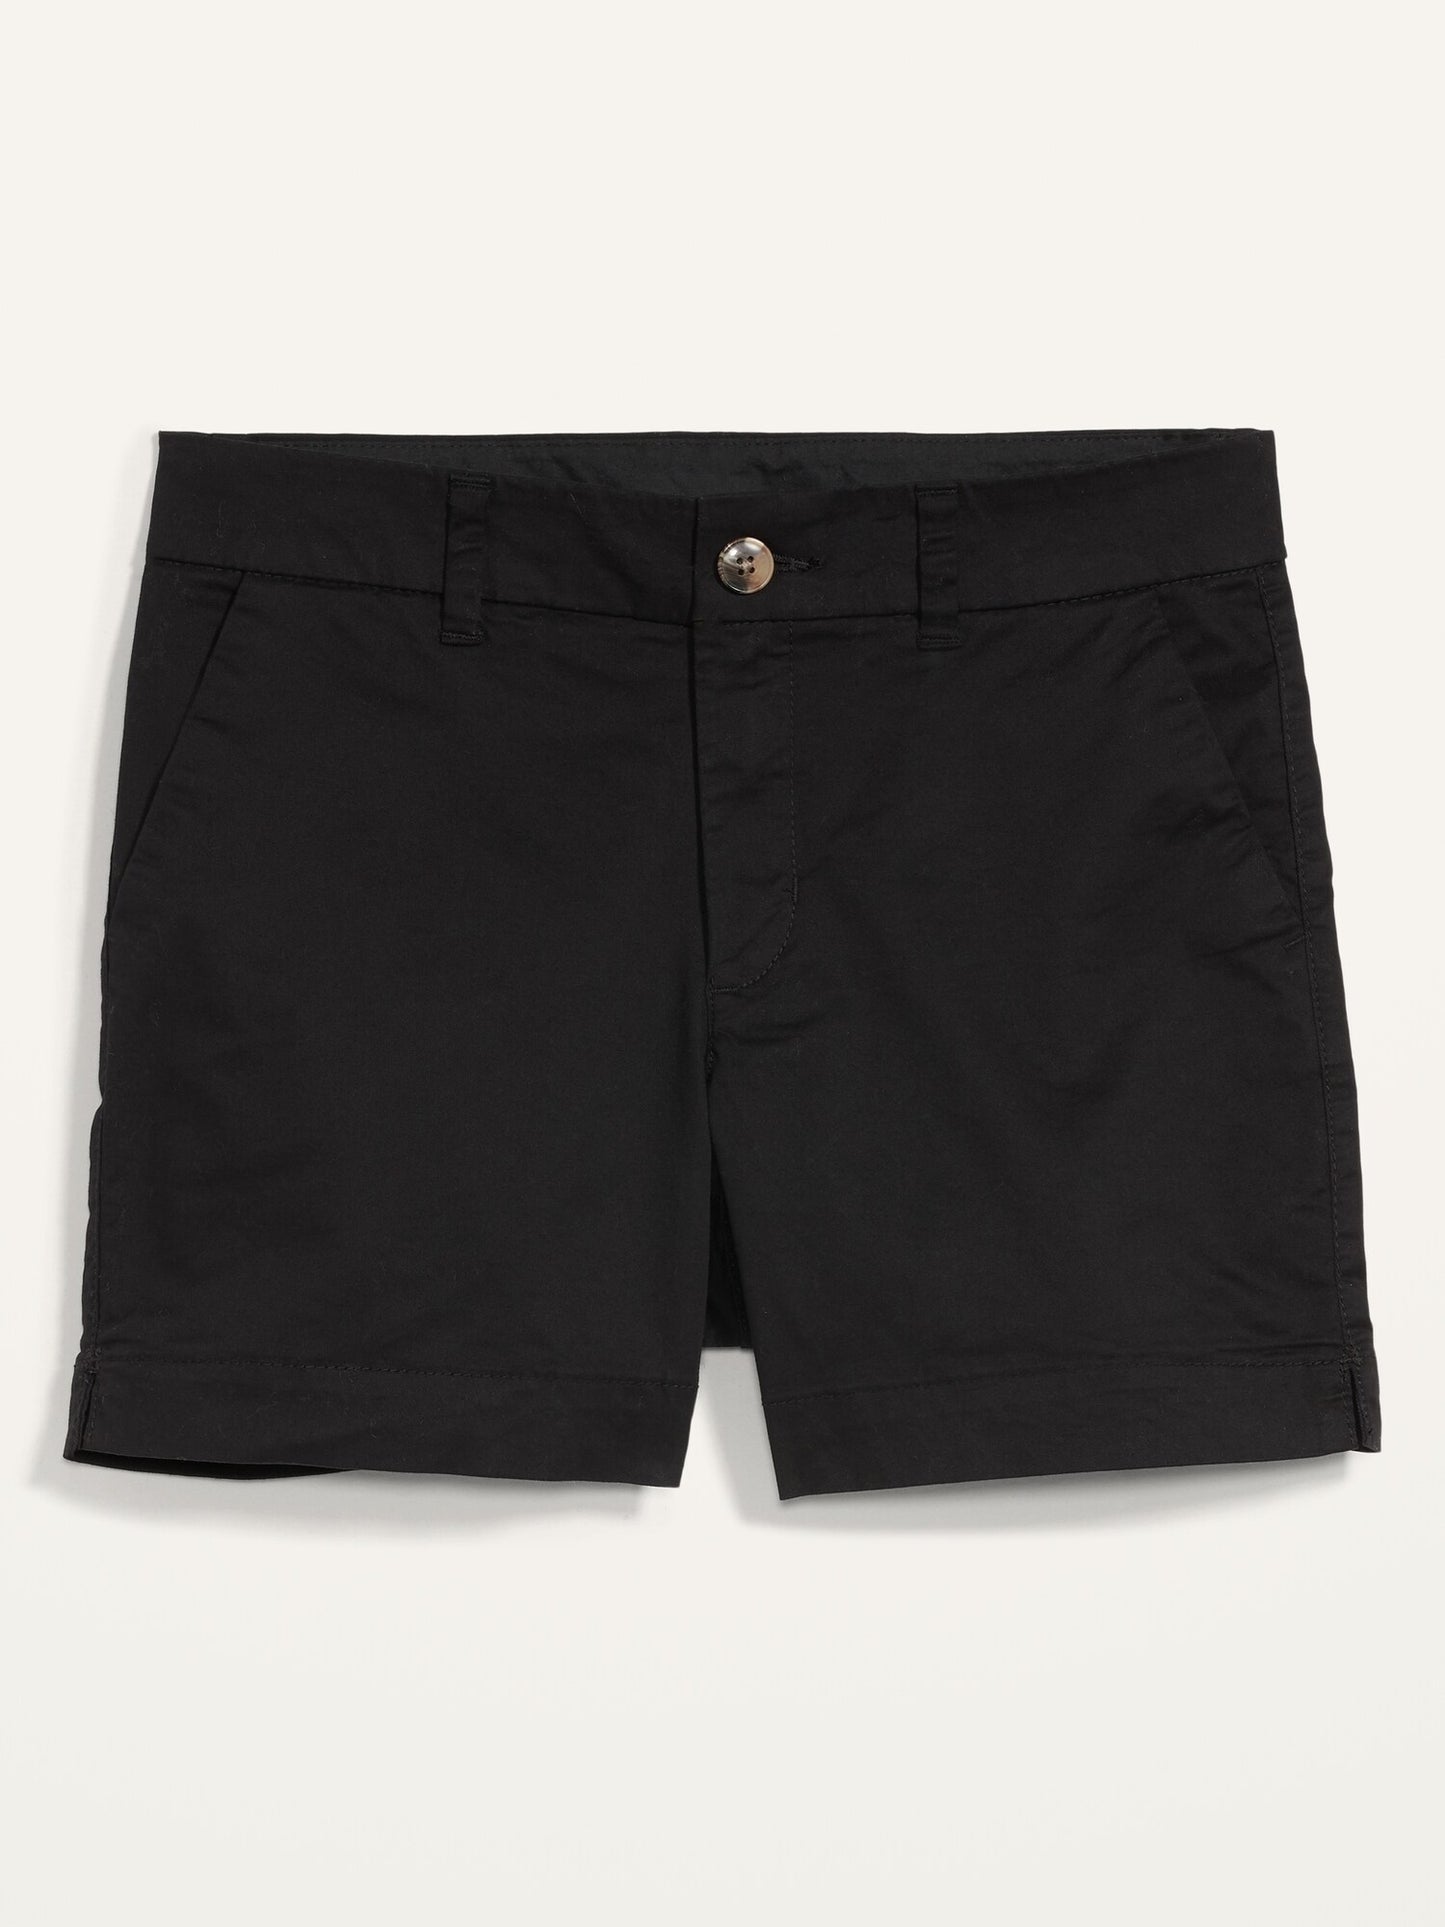 Mid-Rise Everyday Shorts for Women -- 5-inch inseam